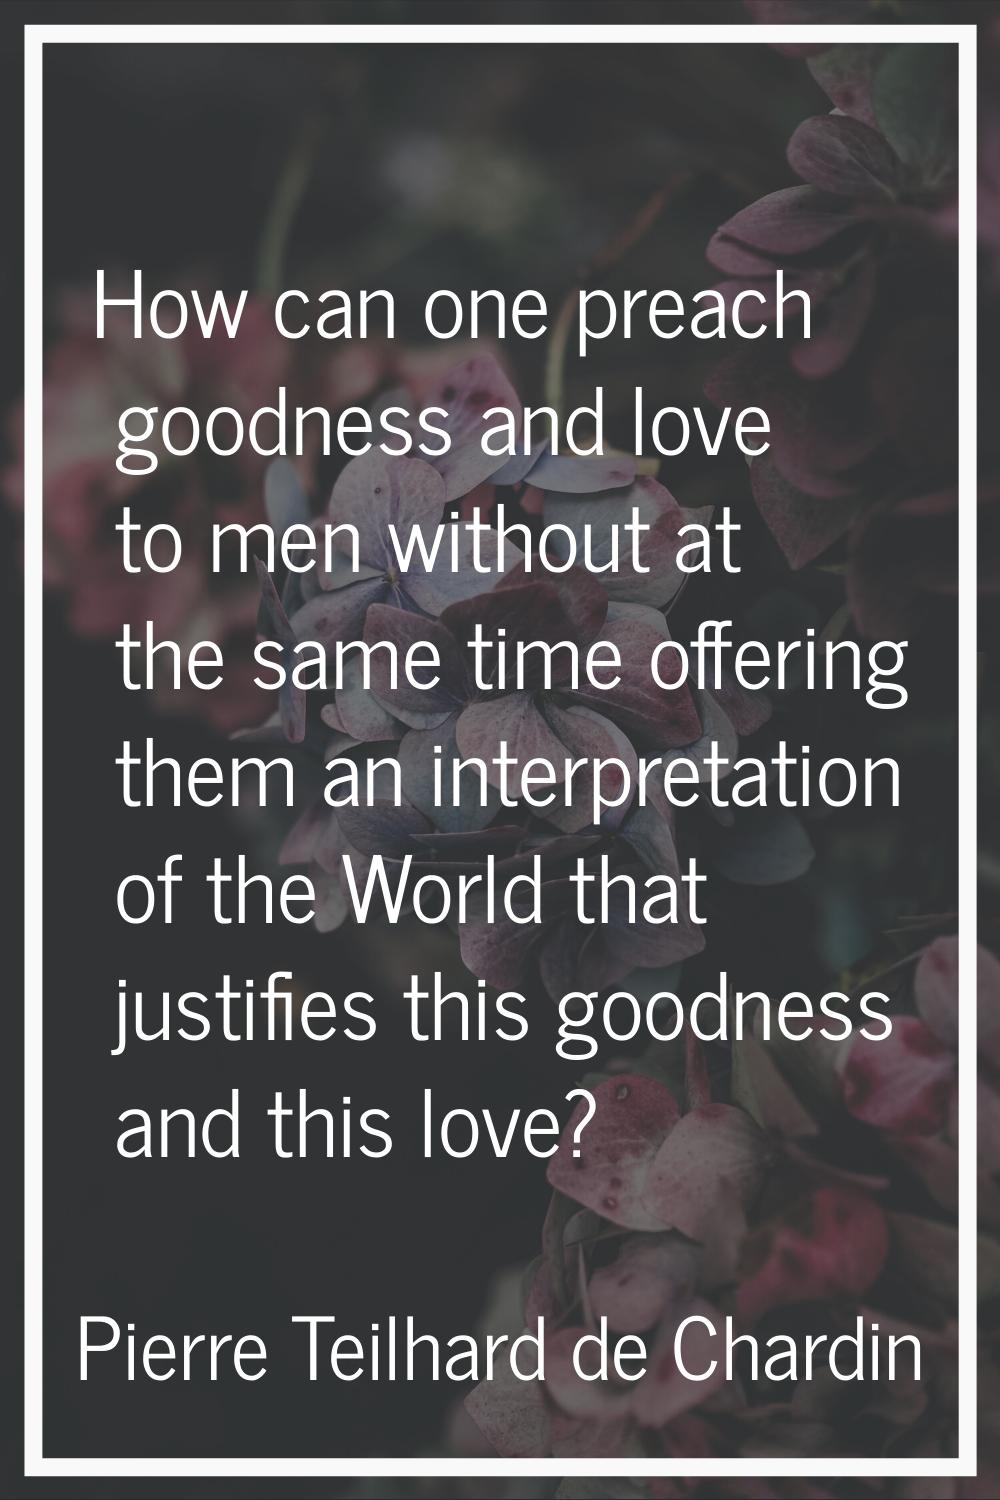 How can one preach goodness and love to men without at the same time offering them an interpretatio